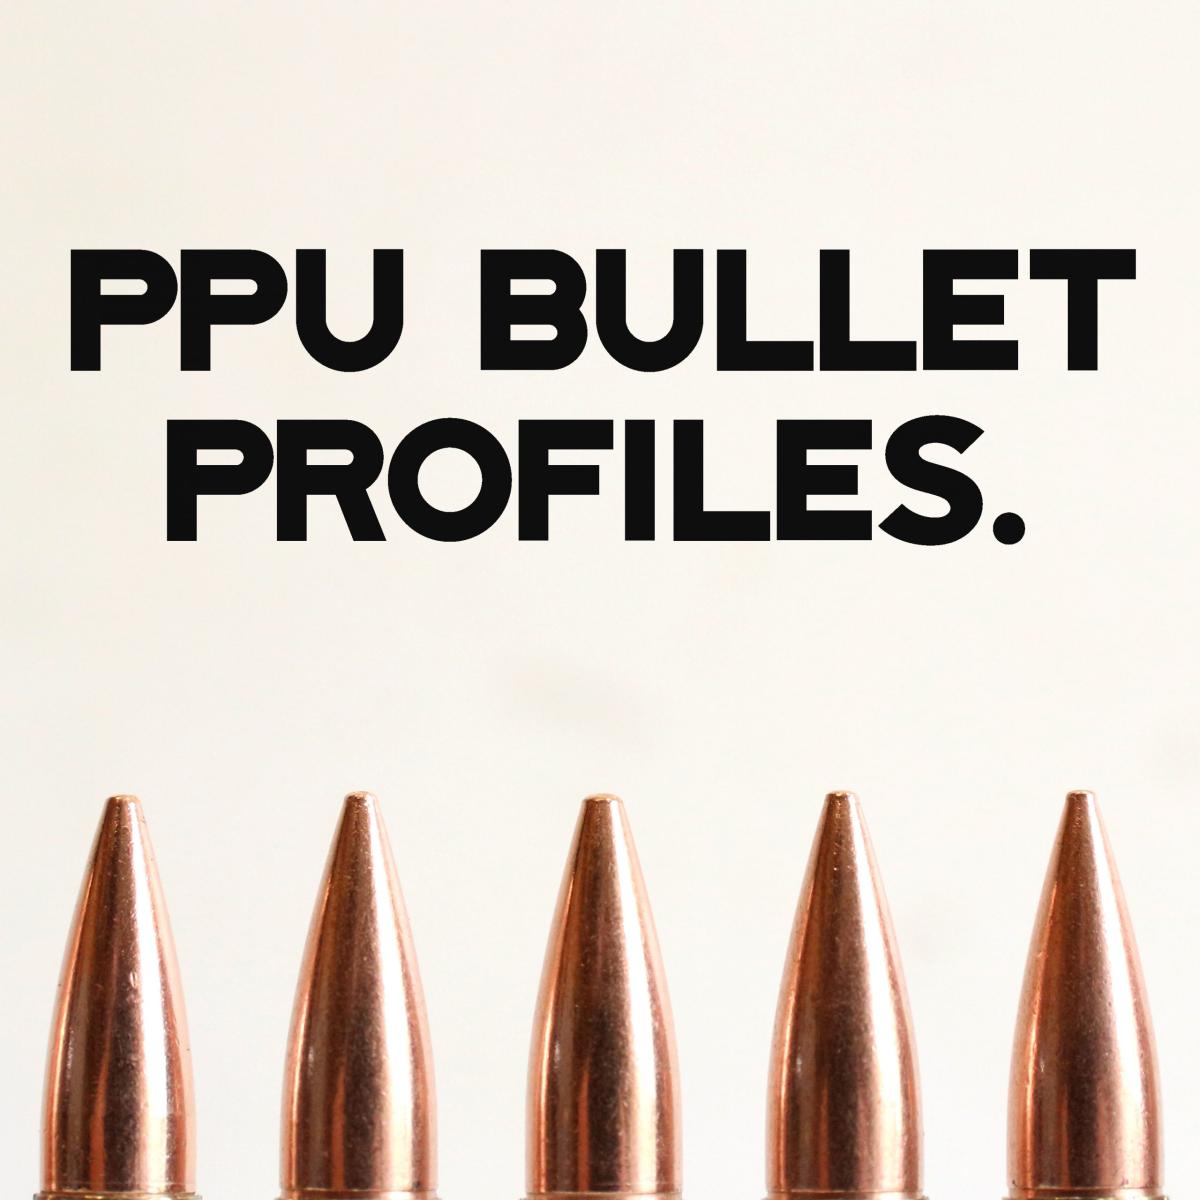 PPU Bullet Profile Acronyms - What They Mean